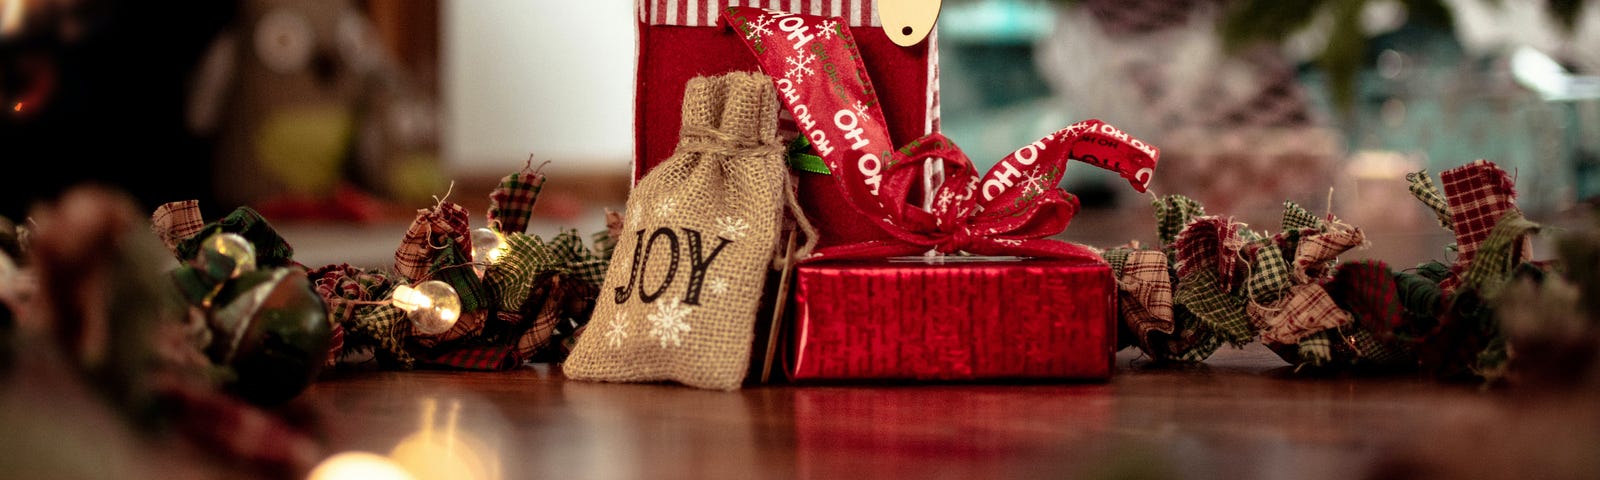 A small burlap bag with the word joy written on it leans against a red wrapped gift and a red gift bag with bright polka-dotted paper. A Christmas tree is in the background slightly out of focus.